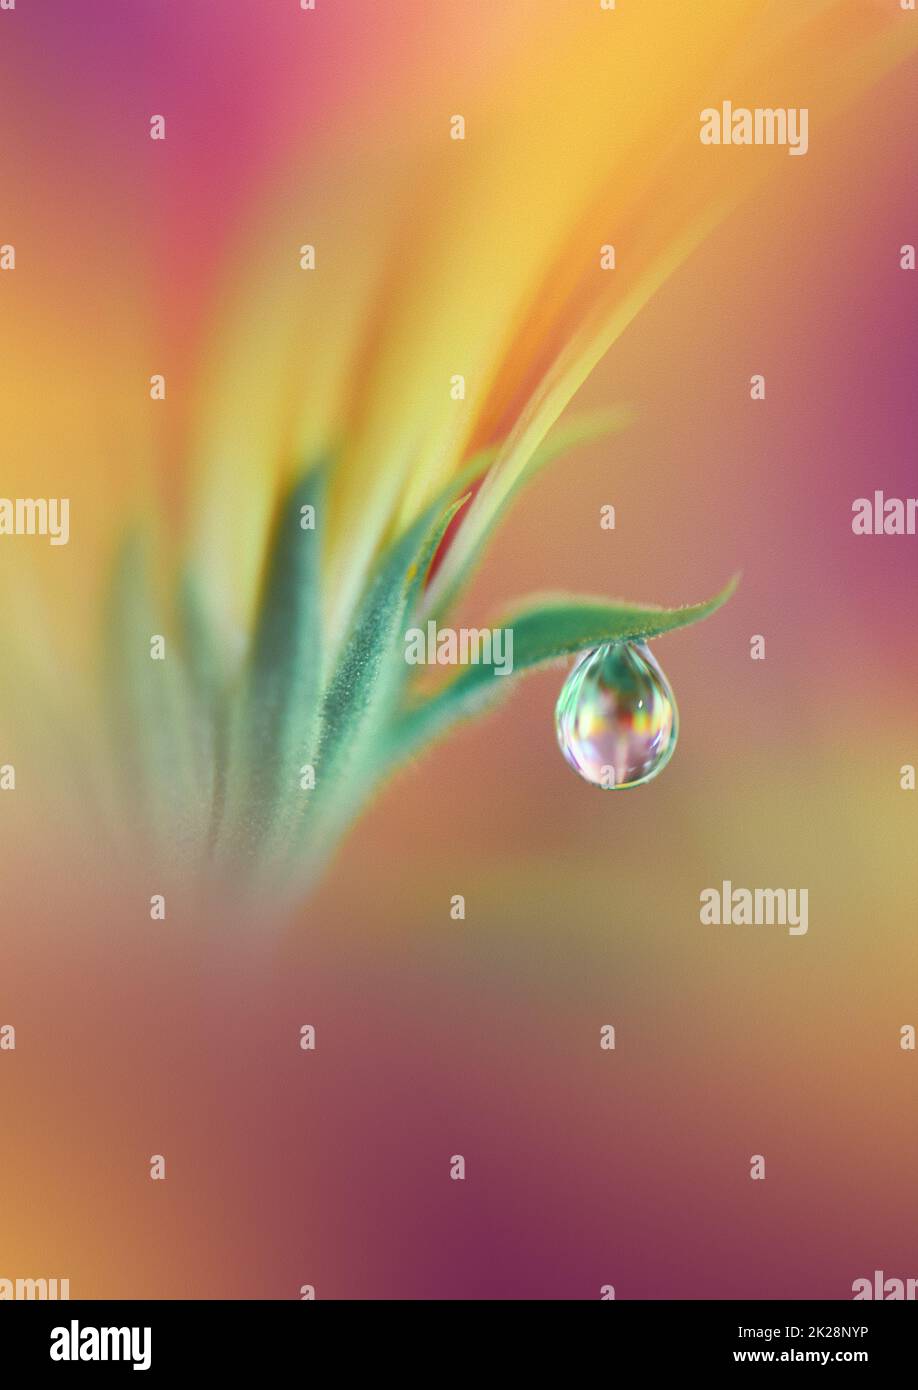 Beautiful Textured Macro Photo.Colorful Flowers.Art Design.Magic Light.Close up Photography.Conceptual Abstract Image.Yellow and Violet Background.Fantasy Floral Art.Creative Wallpaper.Beautiful Nature Background.Amazing Spring Flower.Water Drop.Copy. Stock Photo